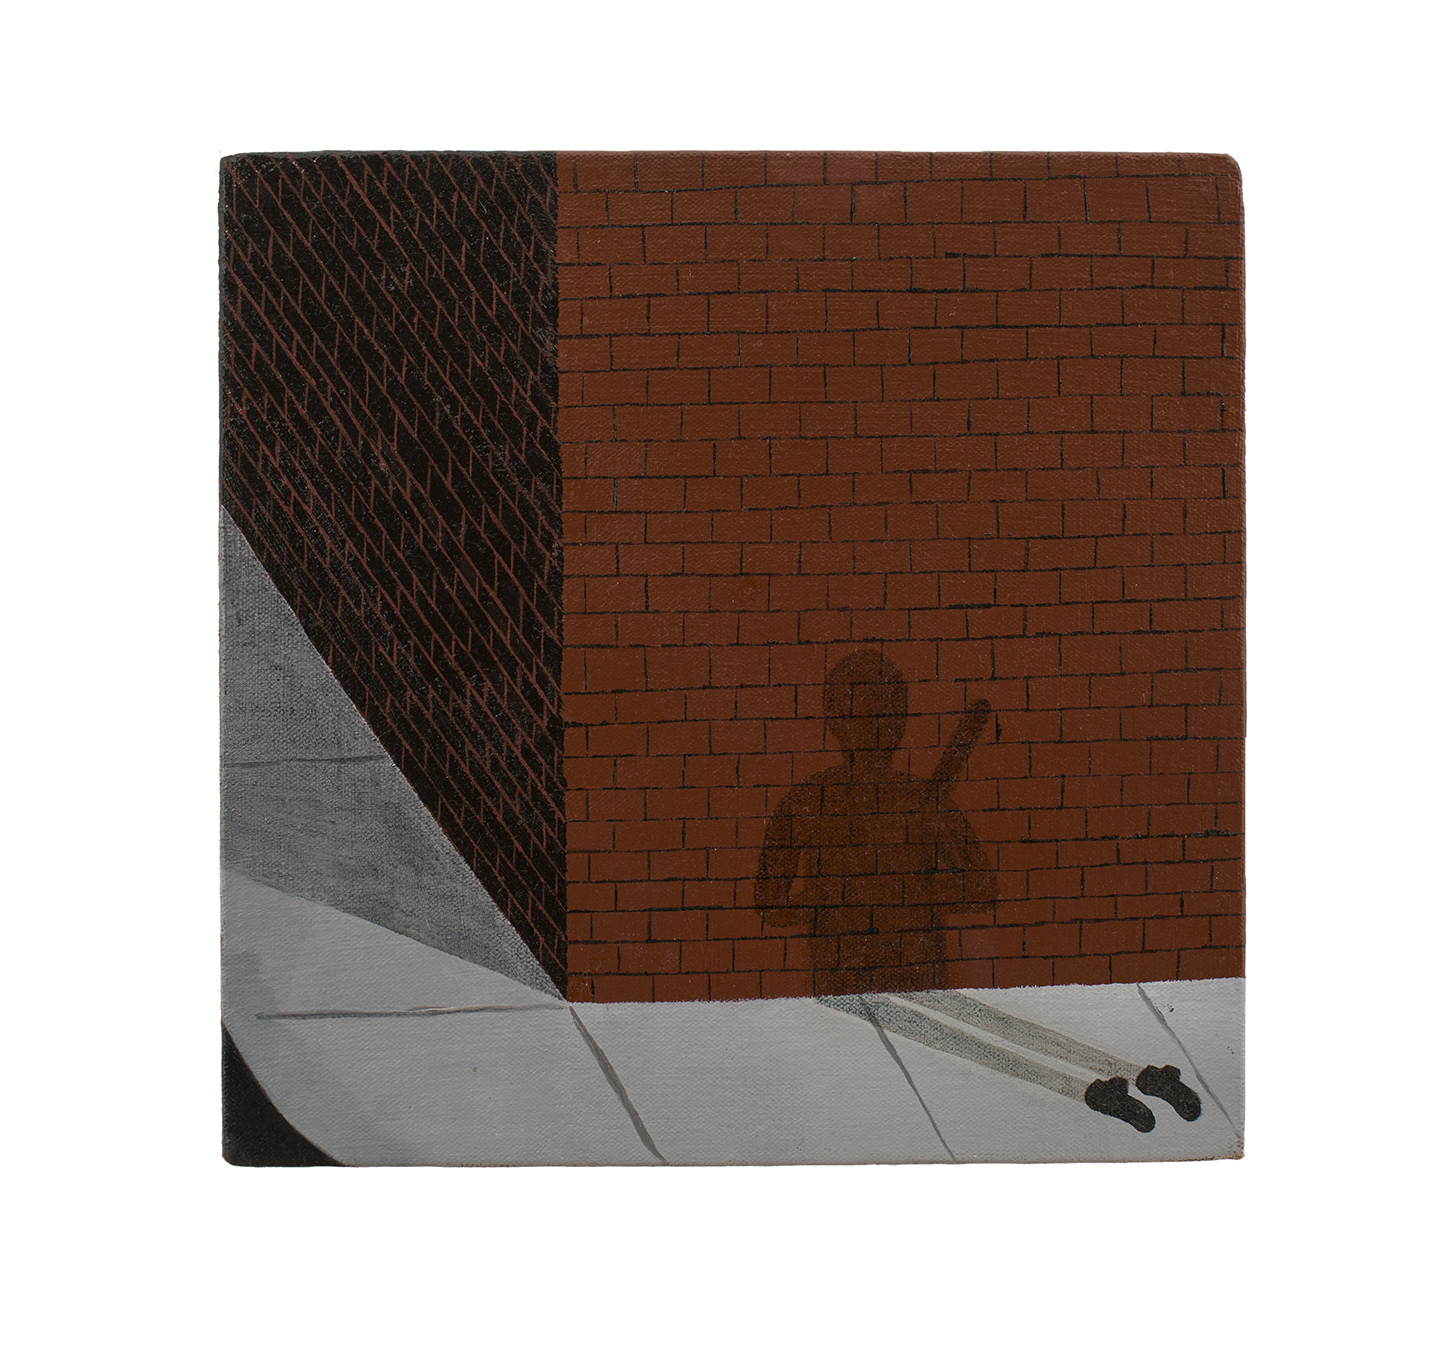 Kenny_Rivero-07_Shadow_on_a_Wall_2014_Oil_and_acrylic_on_canvas